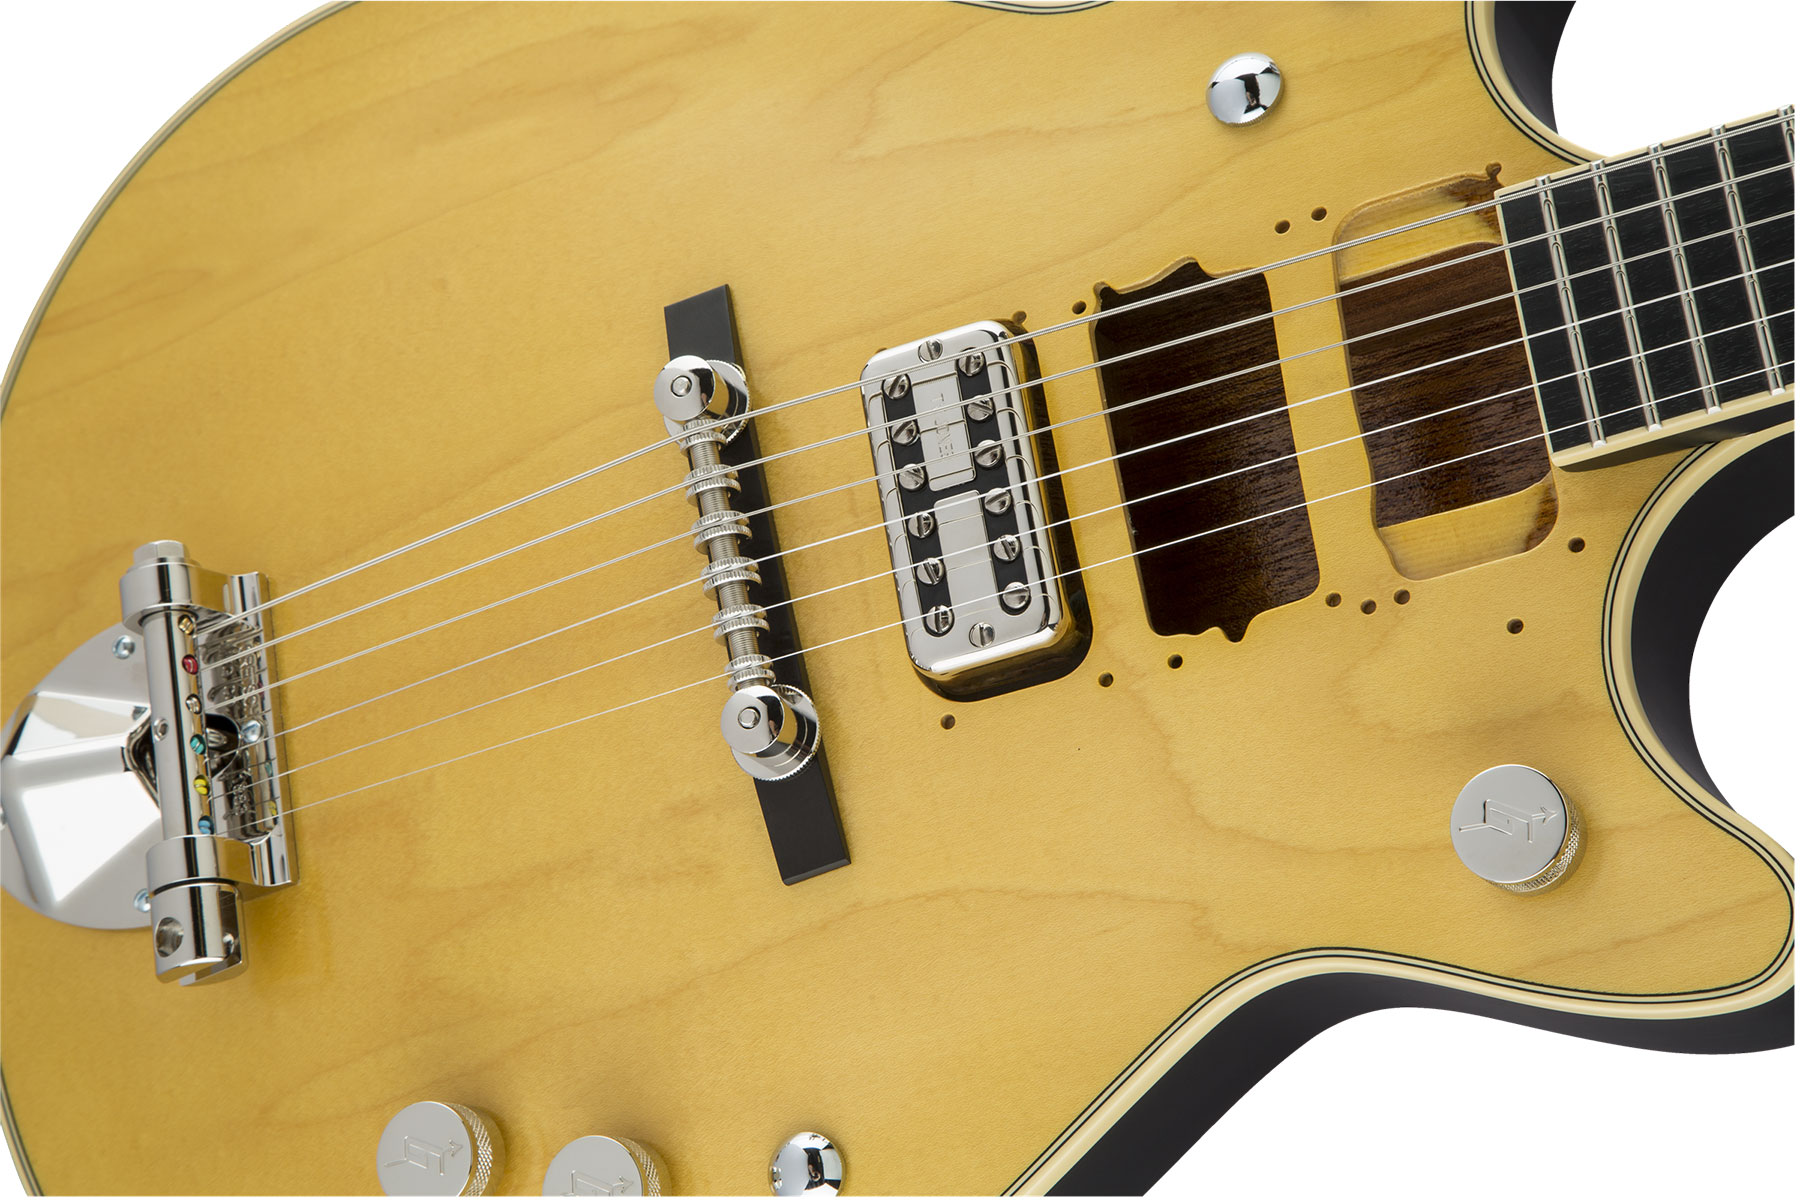 Gretsch Malcolm Young G6131-my Signature Jet Eb - Aged Natural - Double Cut E-Gitarre - Variation 3